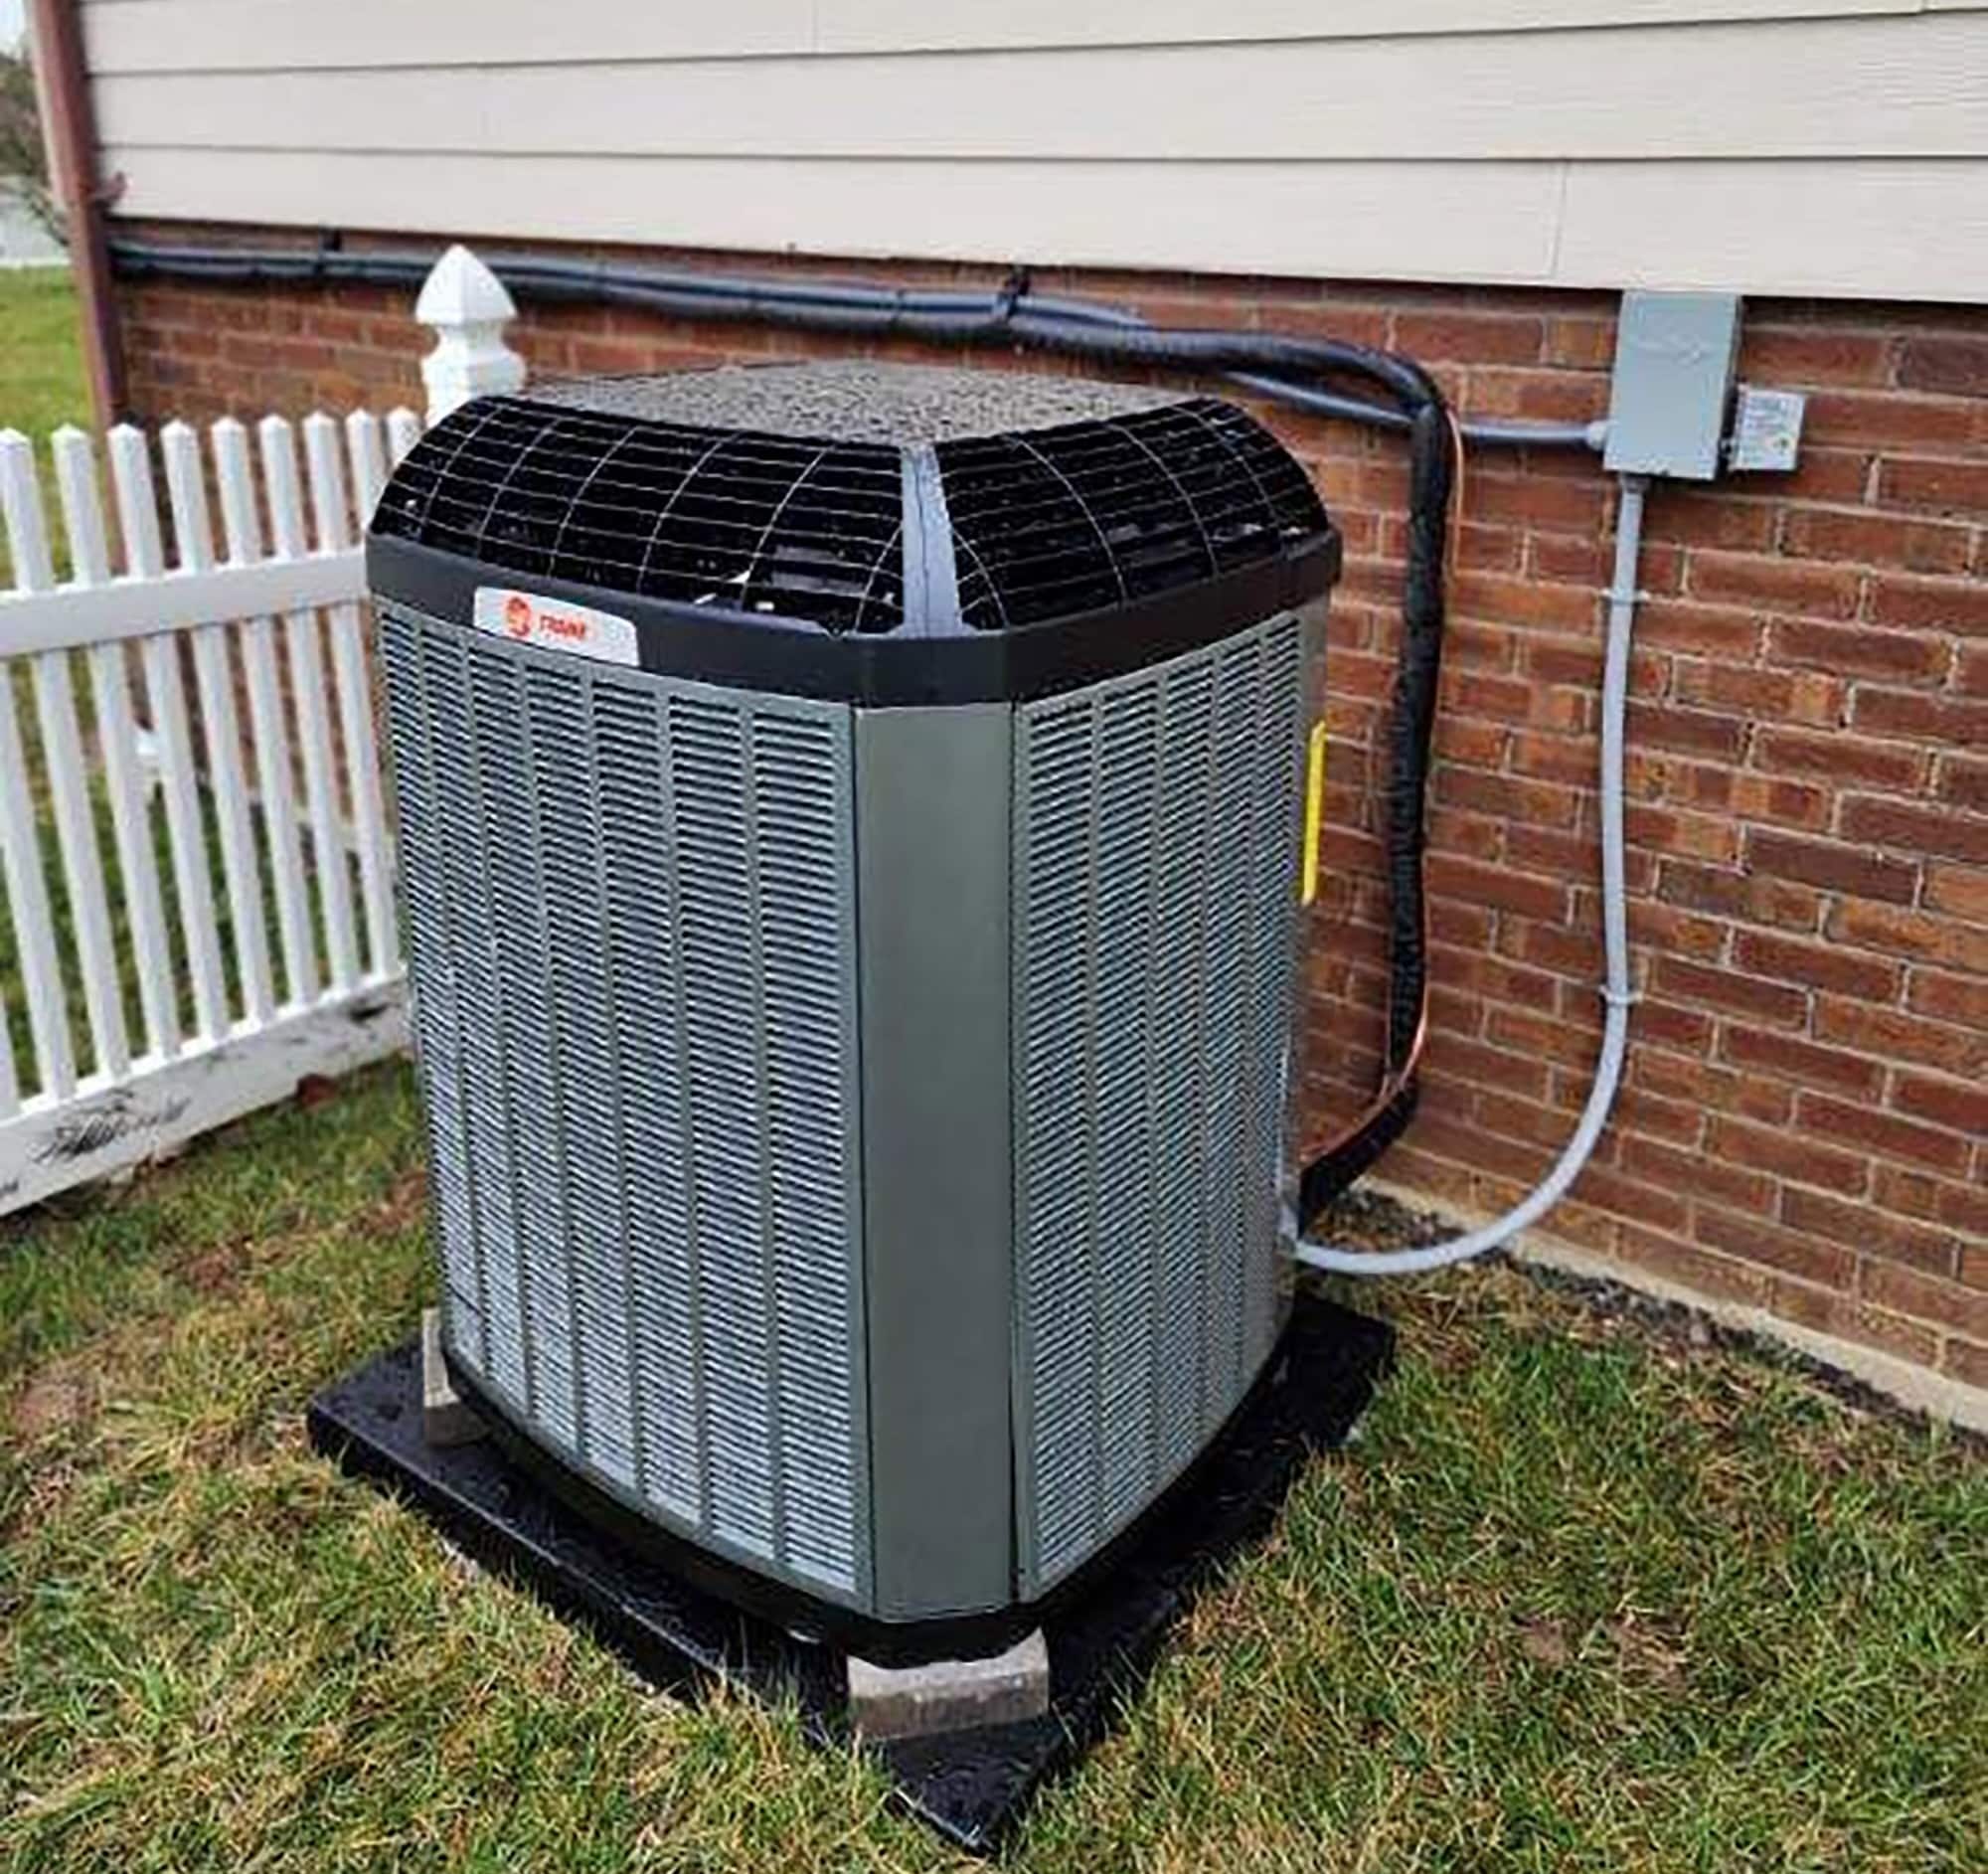 New Trane XV20i Air Conditioner After Watkins Replacment